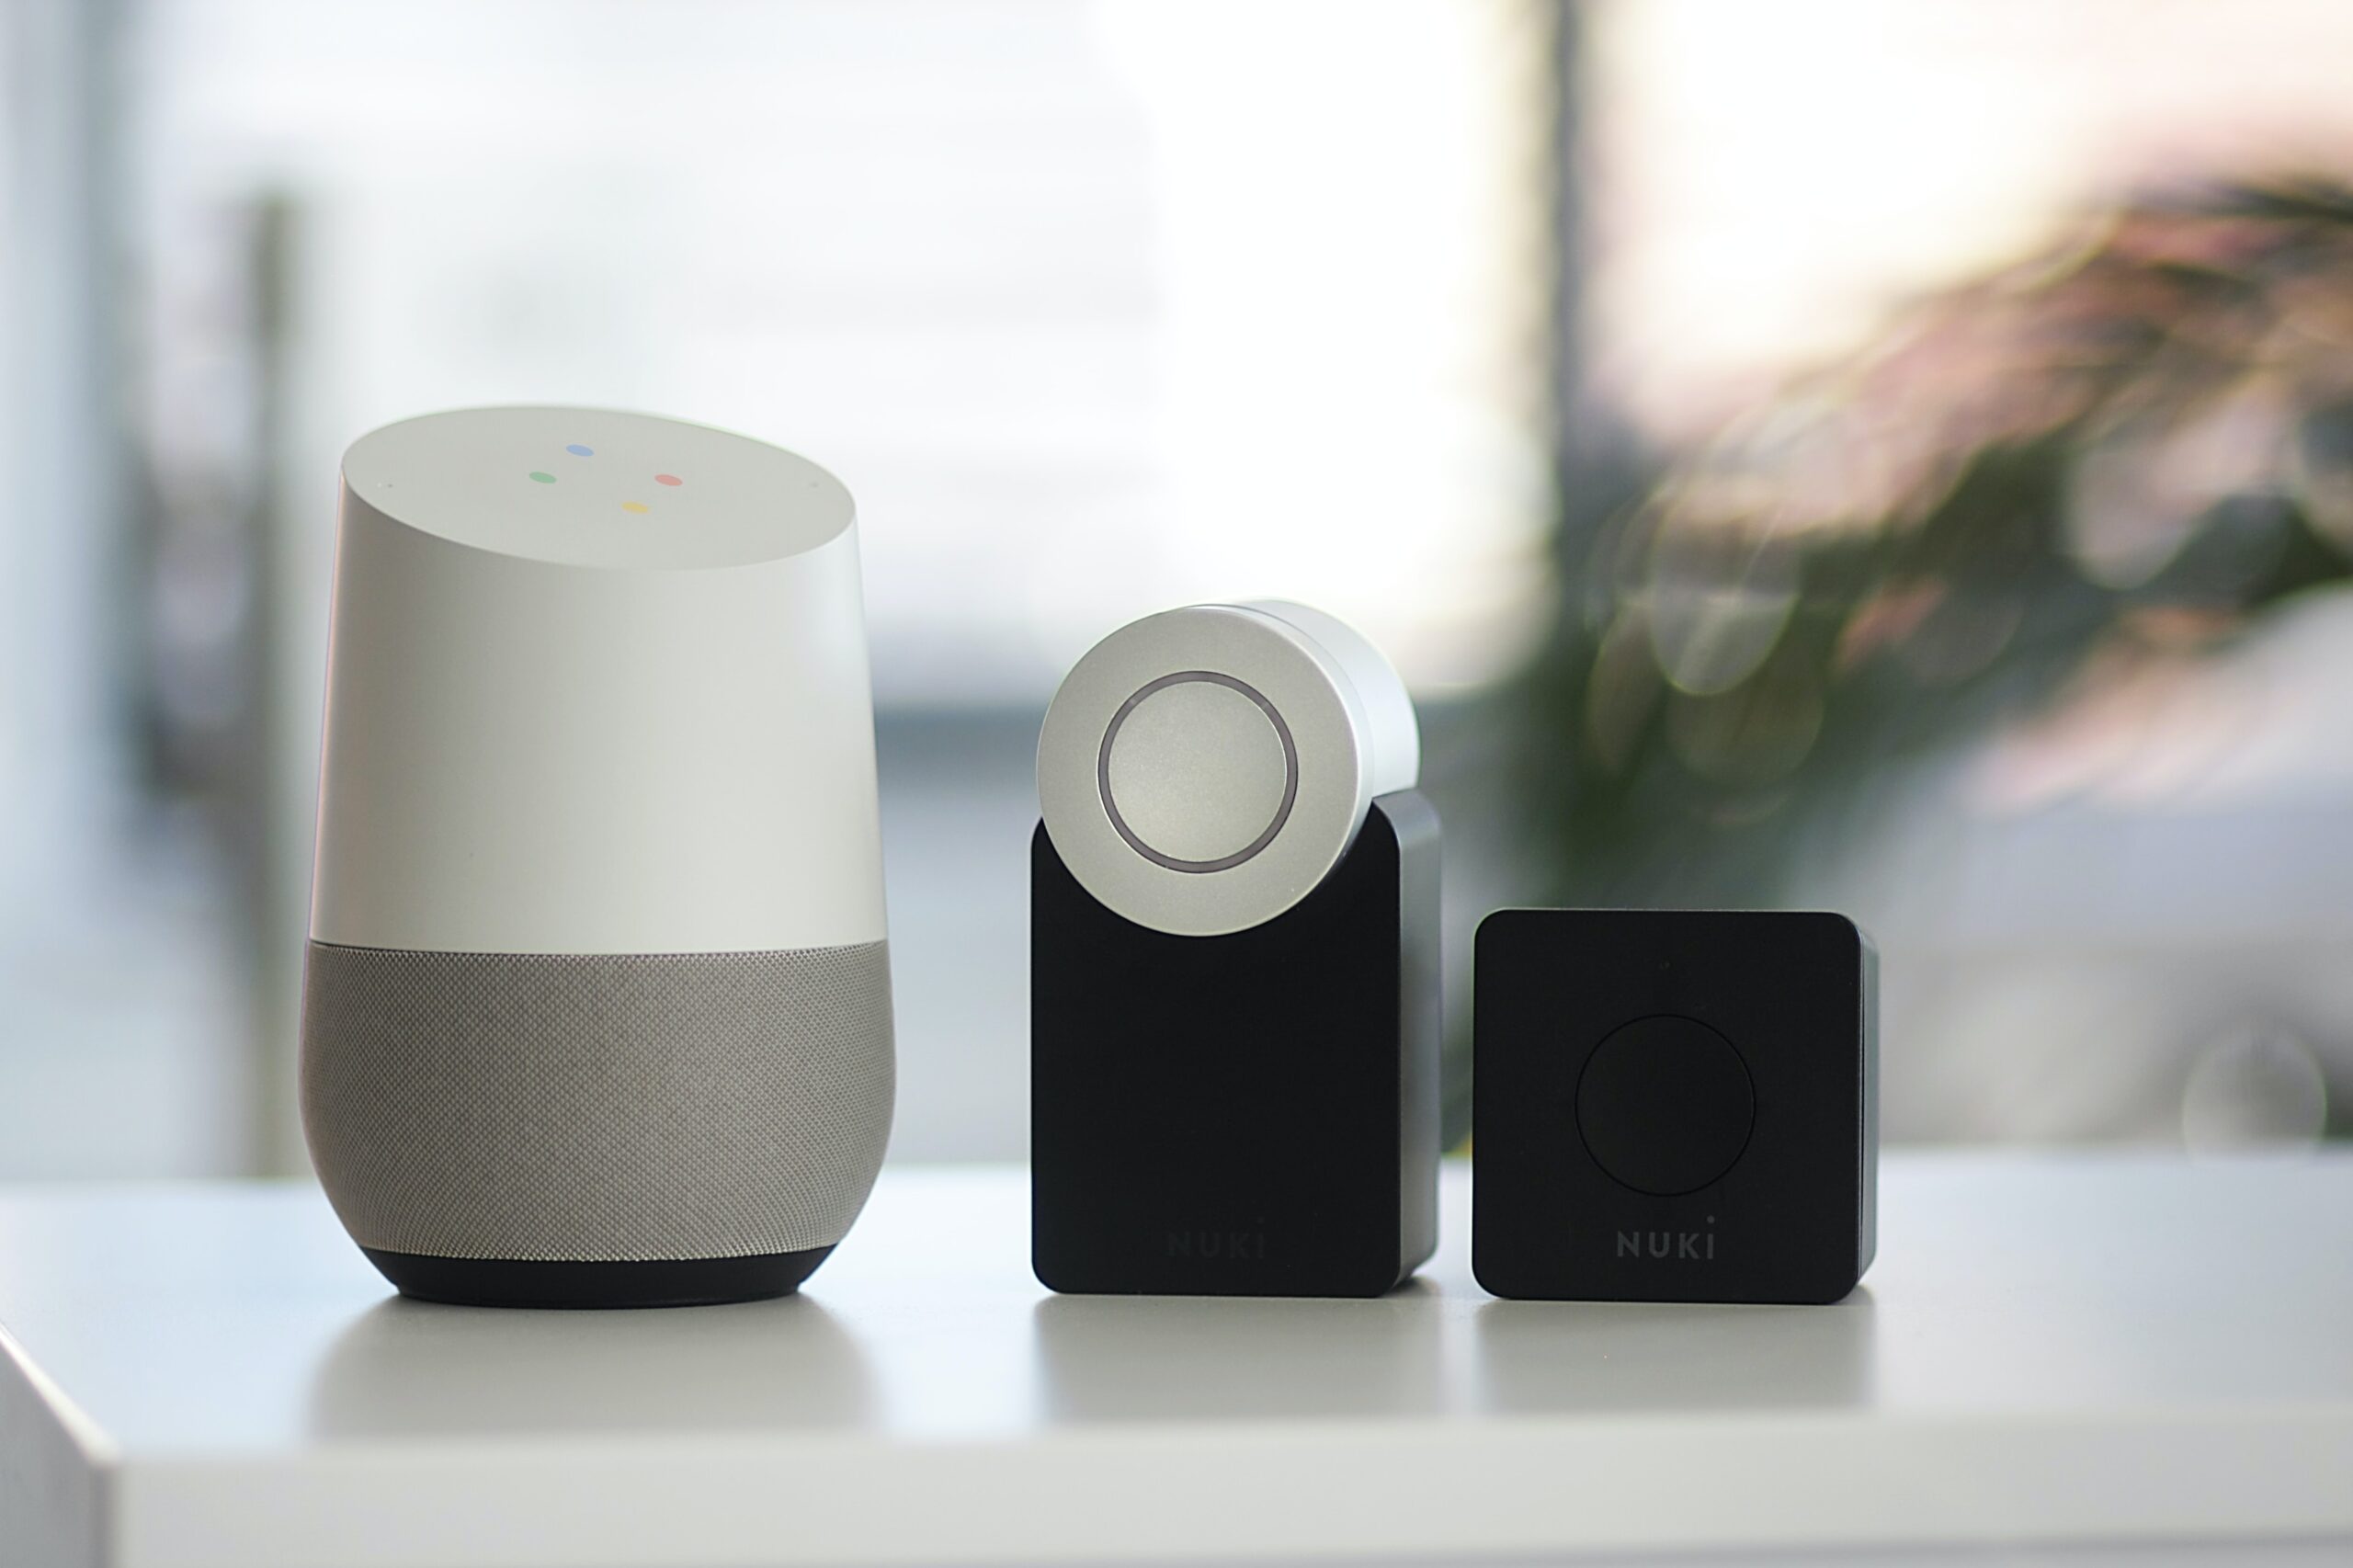 white and gray Google smart speaker and two black speakers - One of the Smart Home Devices